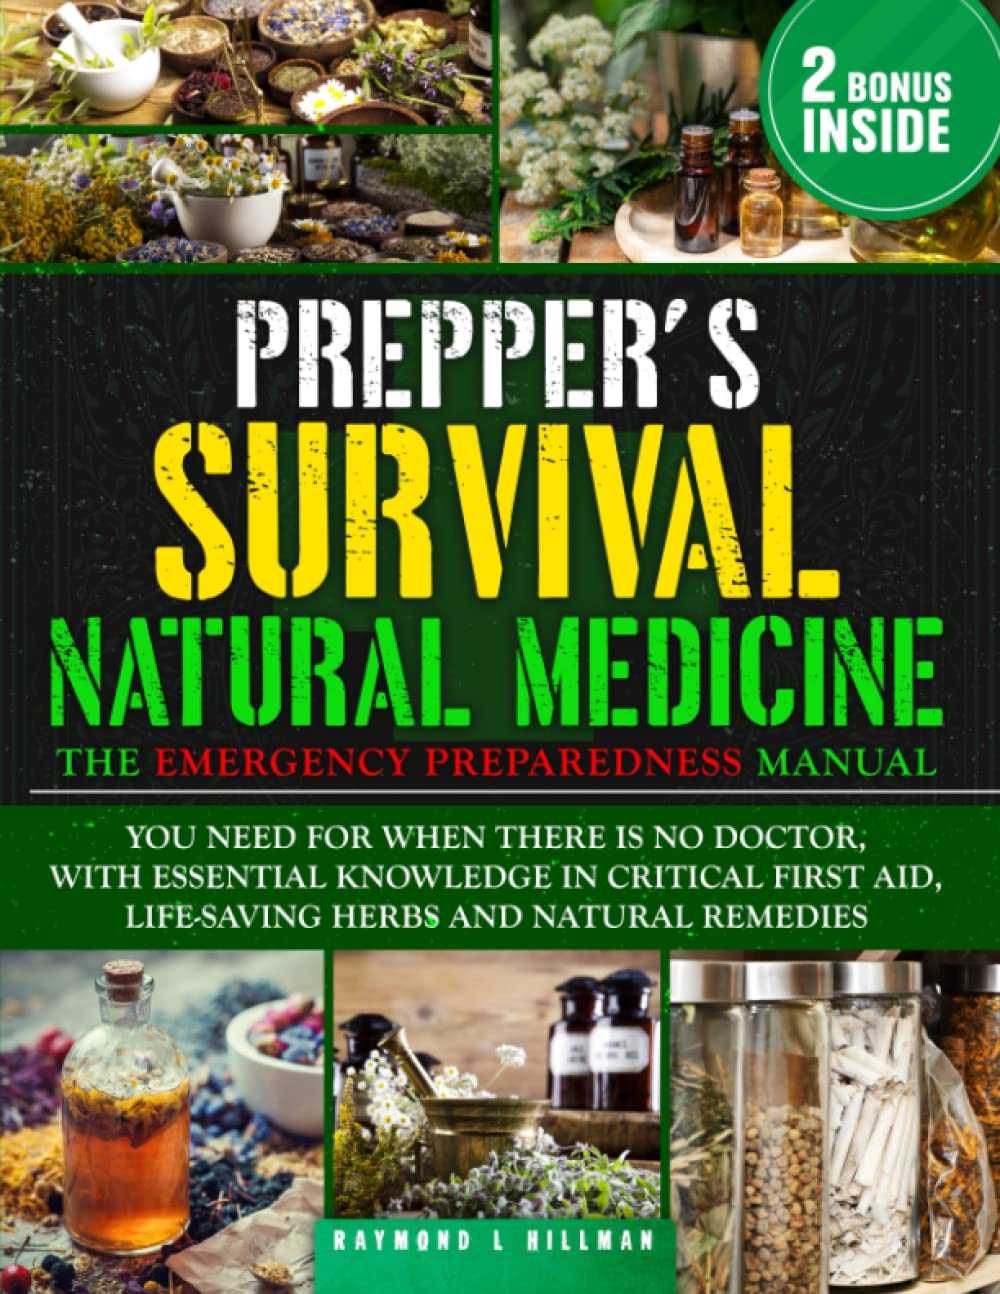 The Prepper’s Survival Natural Medicine: The Emergency Preparedness Manual You Need for When There is No Doctor, With Essential Knowledge in Critical First Aid, Life-Saving Herbs and Natural Remedies